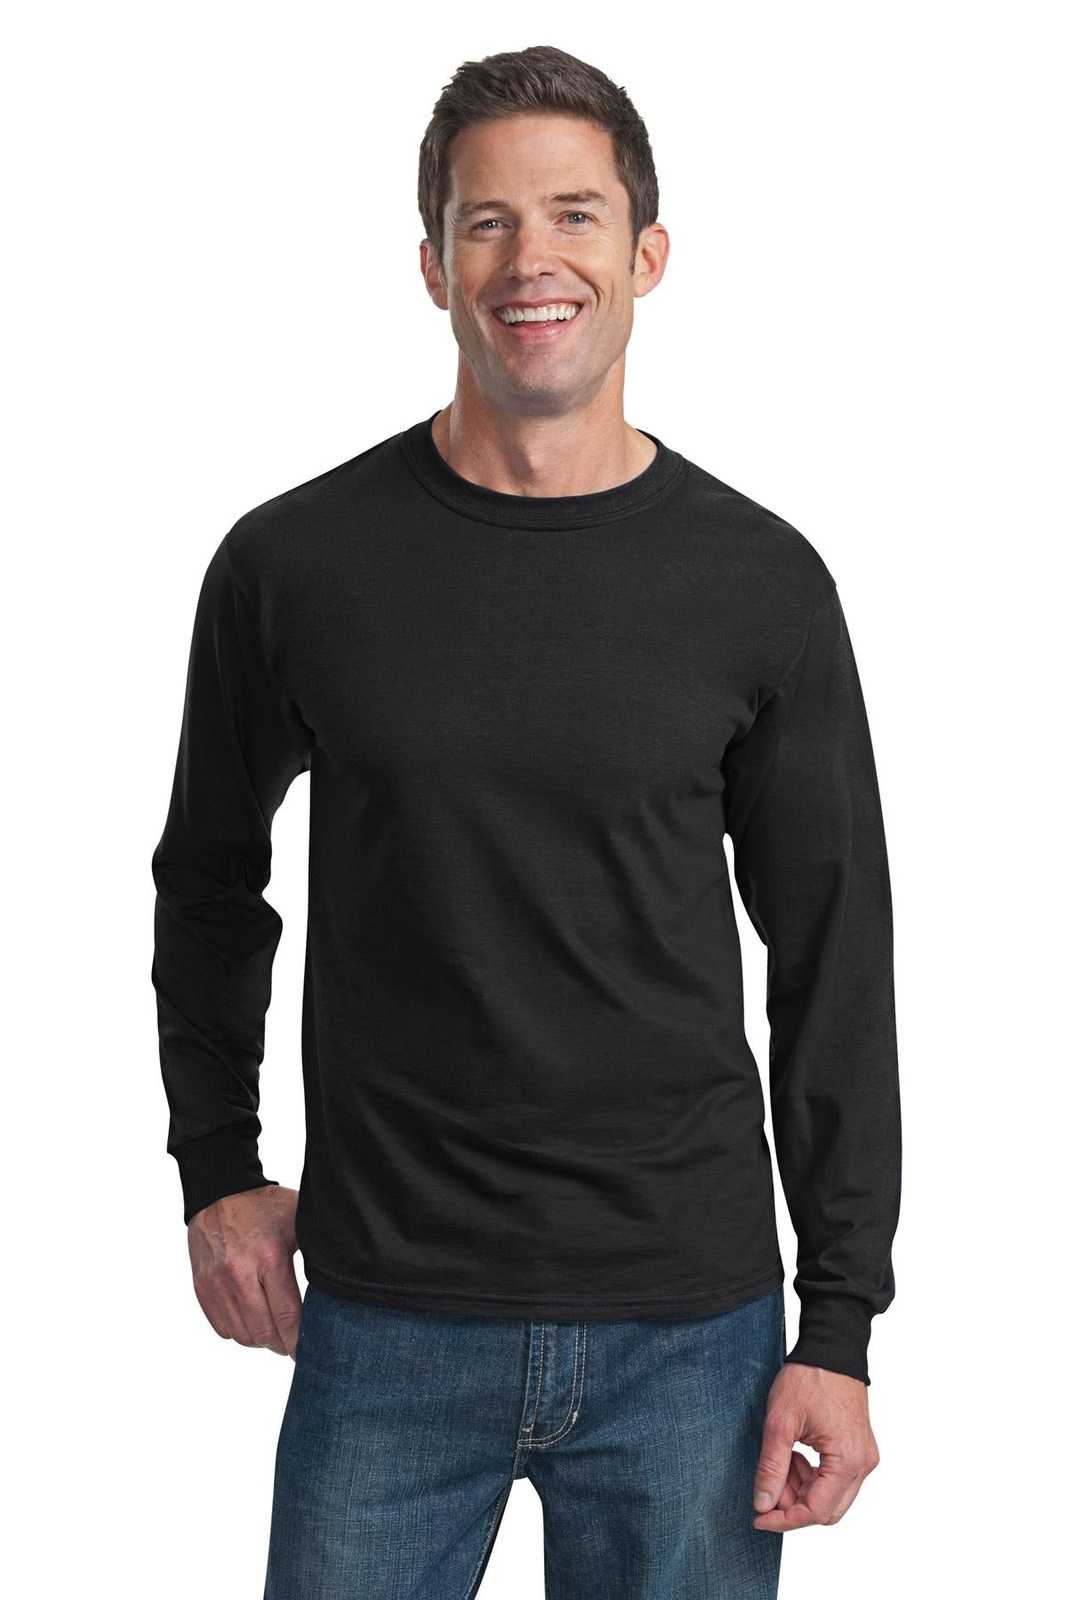 Fruit of the Loom 4930 HD Cotton 100% Cotton Long Sleeve T-Shirt - Black - HIT a Double